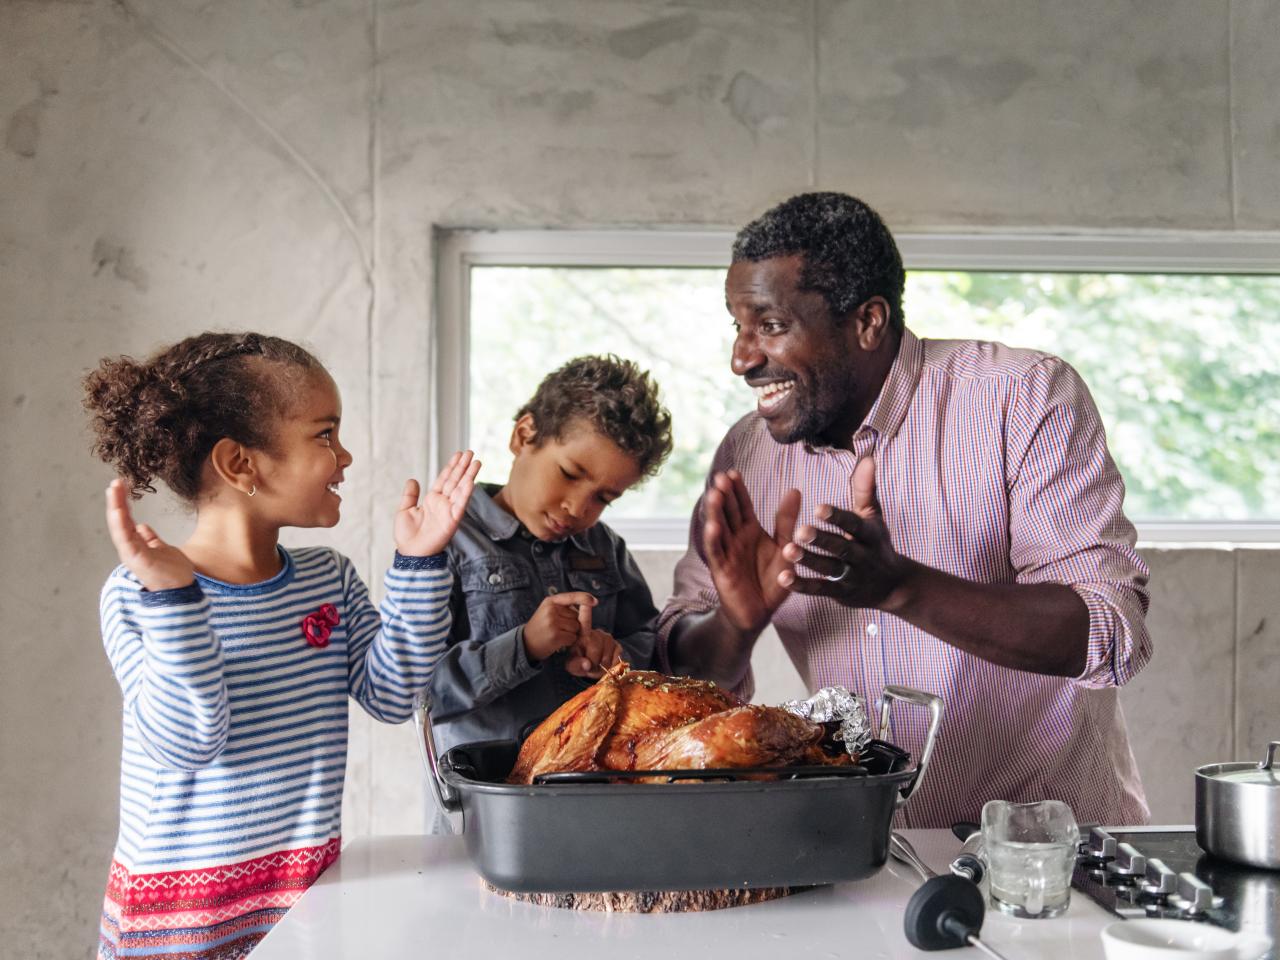 https://food.fnr.sndimg.com/content/dam/images/food/fullset/2020/06/19/FN_father's-day-GettyImages-1044276466.jpg.rend.hgtvcom.1280.960.suffix/1592583648734.jpeg